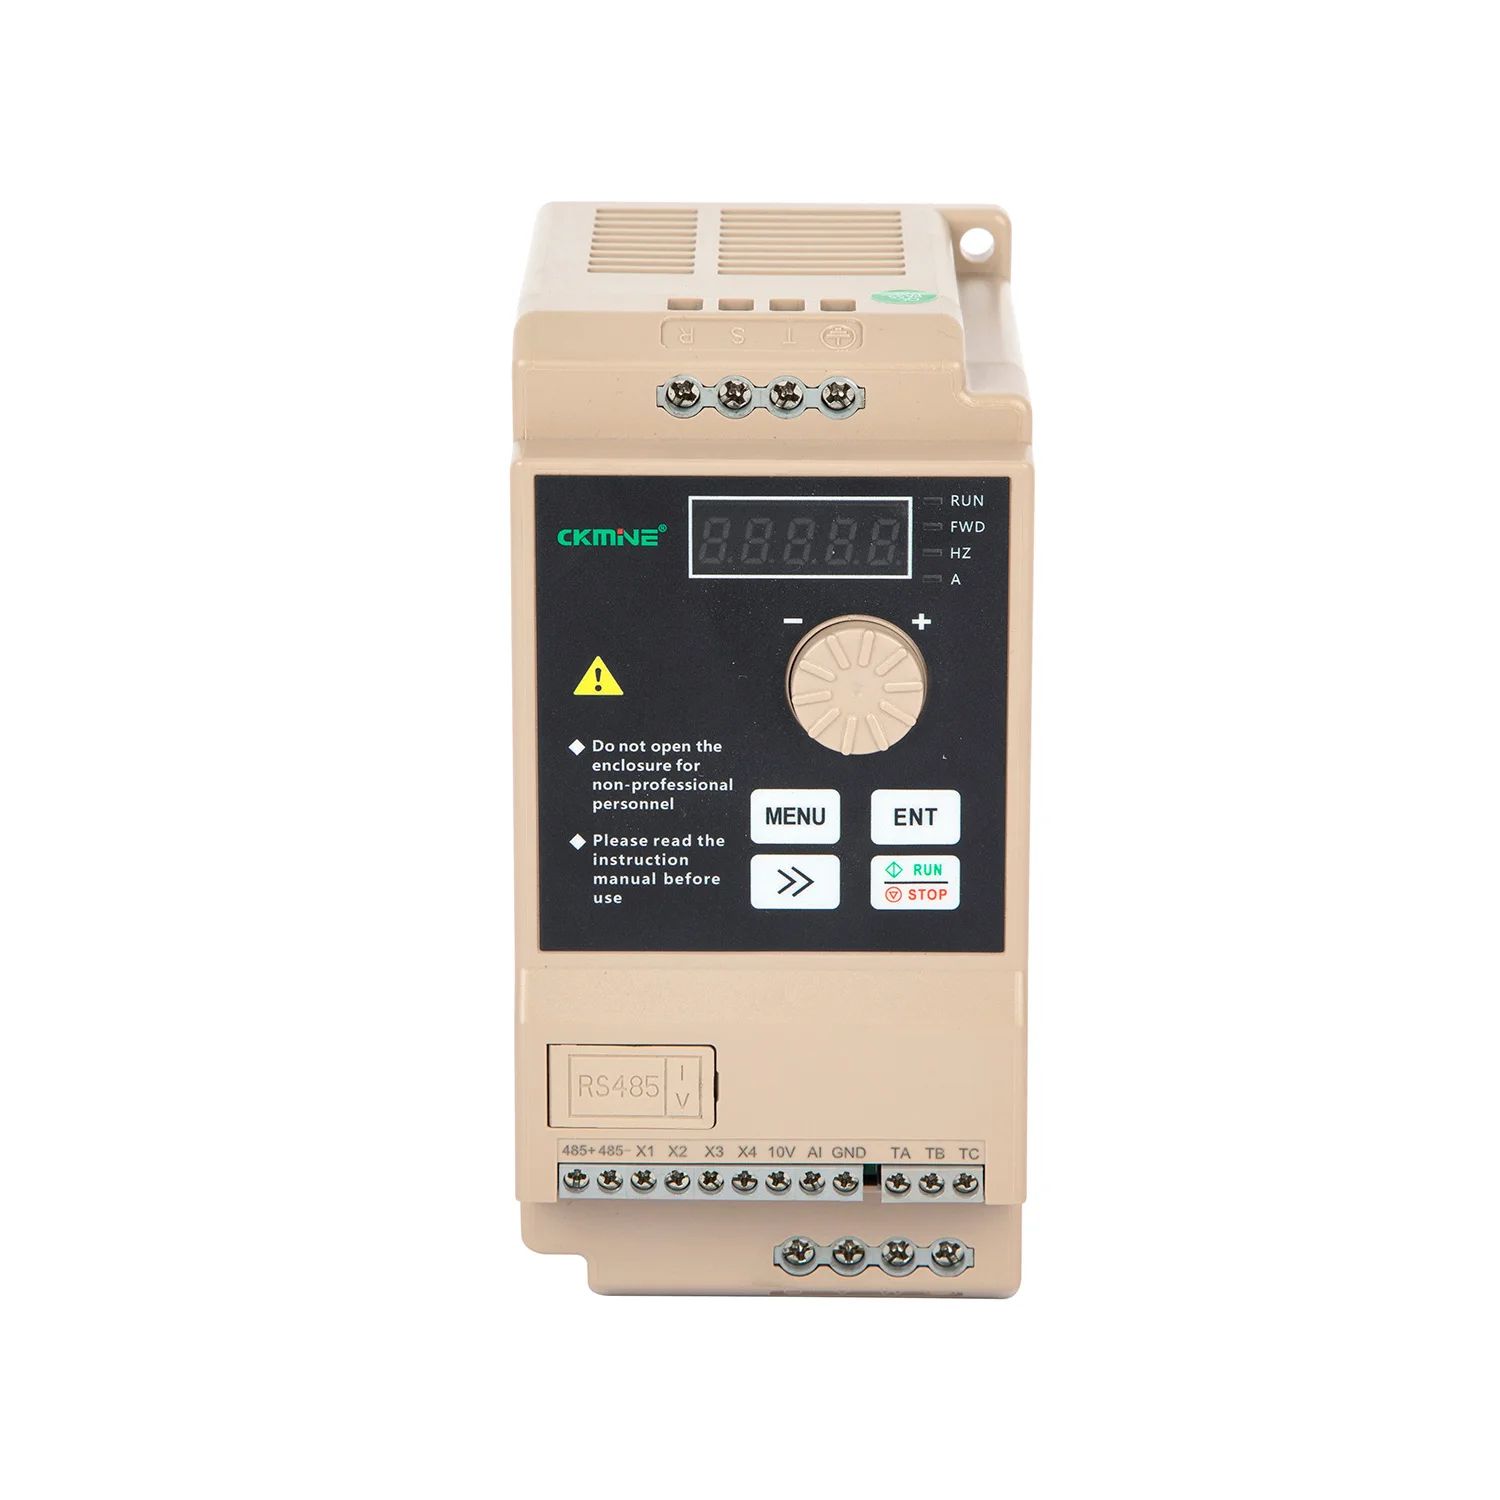 CKMINE Motor Control Inverter 3 Phase 220V VFD 2.2kW 1.5kW 0.75kW 3HP Variable Frequency Drive AC Converter for Factory Machine